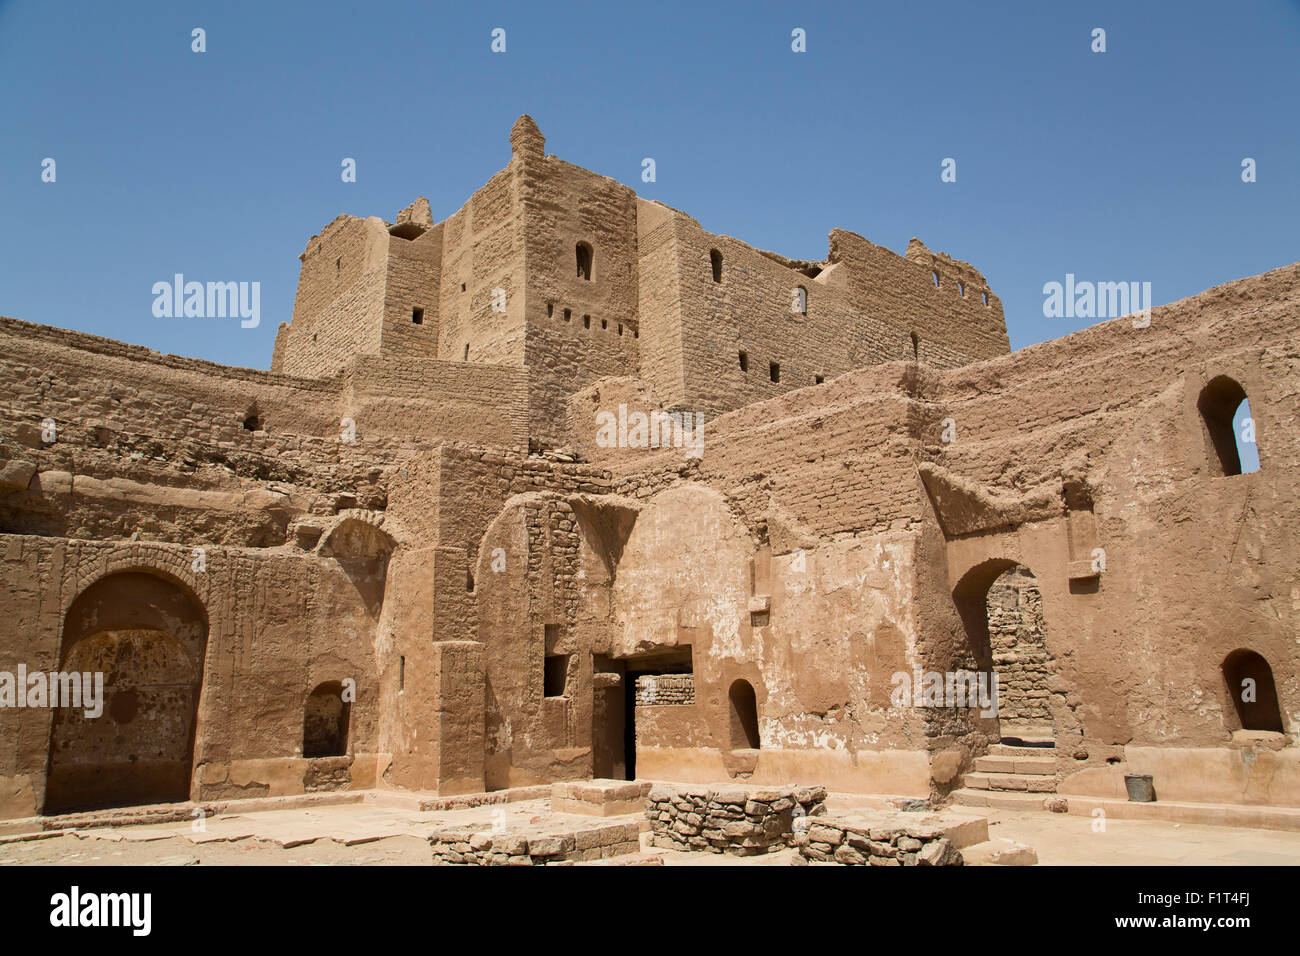 Monastery of St. Simeon, founded in the 7th century, Aswan, Egypt, North Africa, Africa Stock Photo